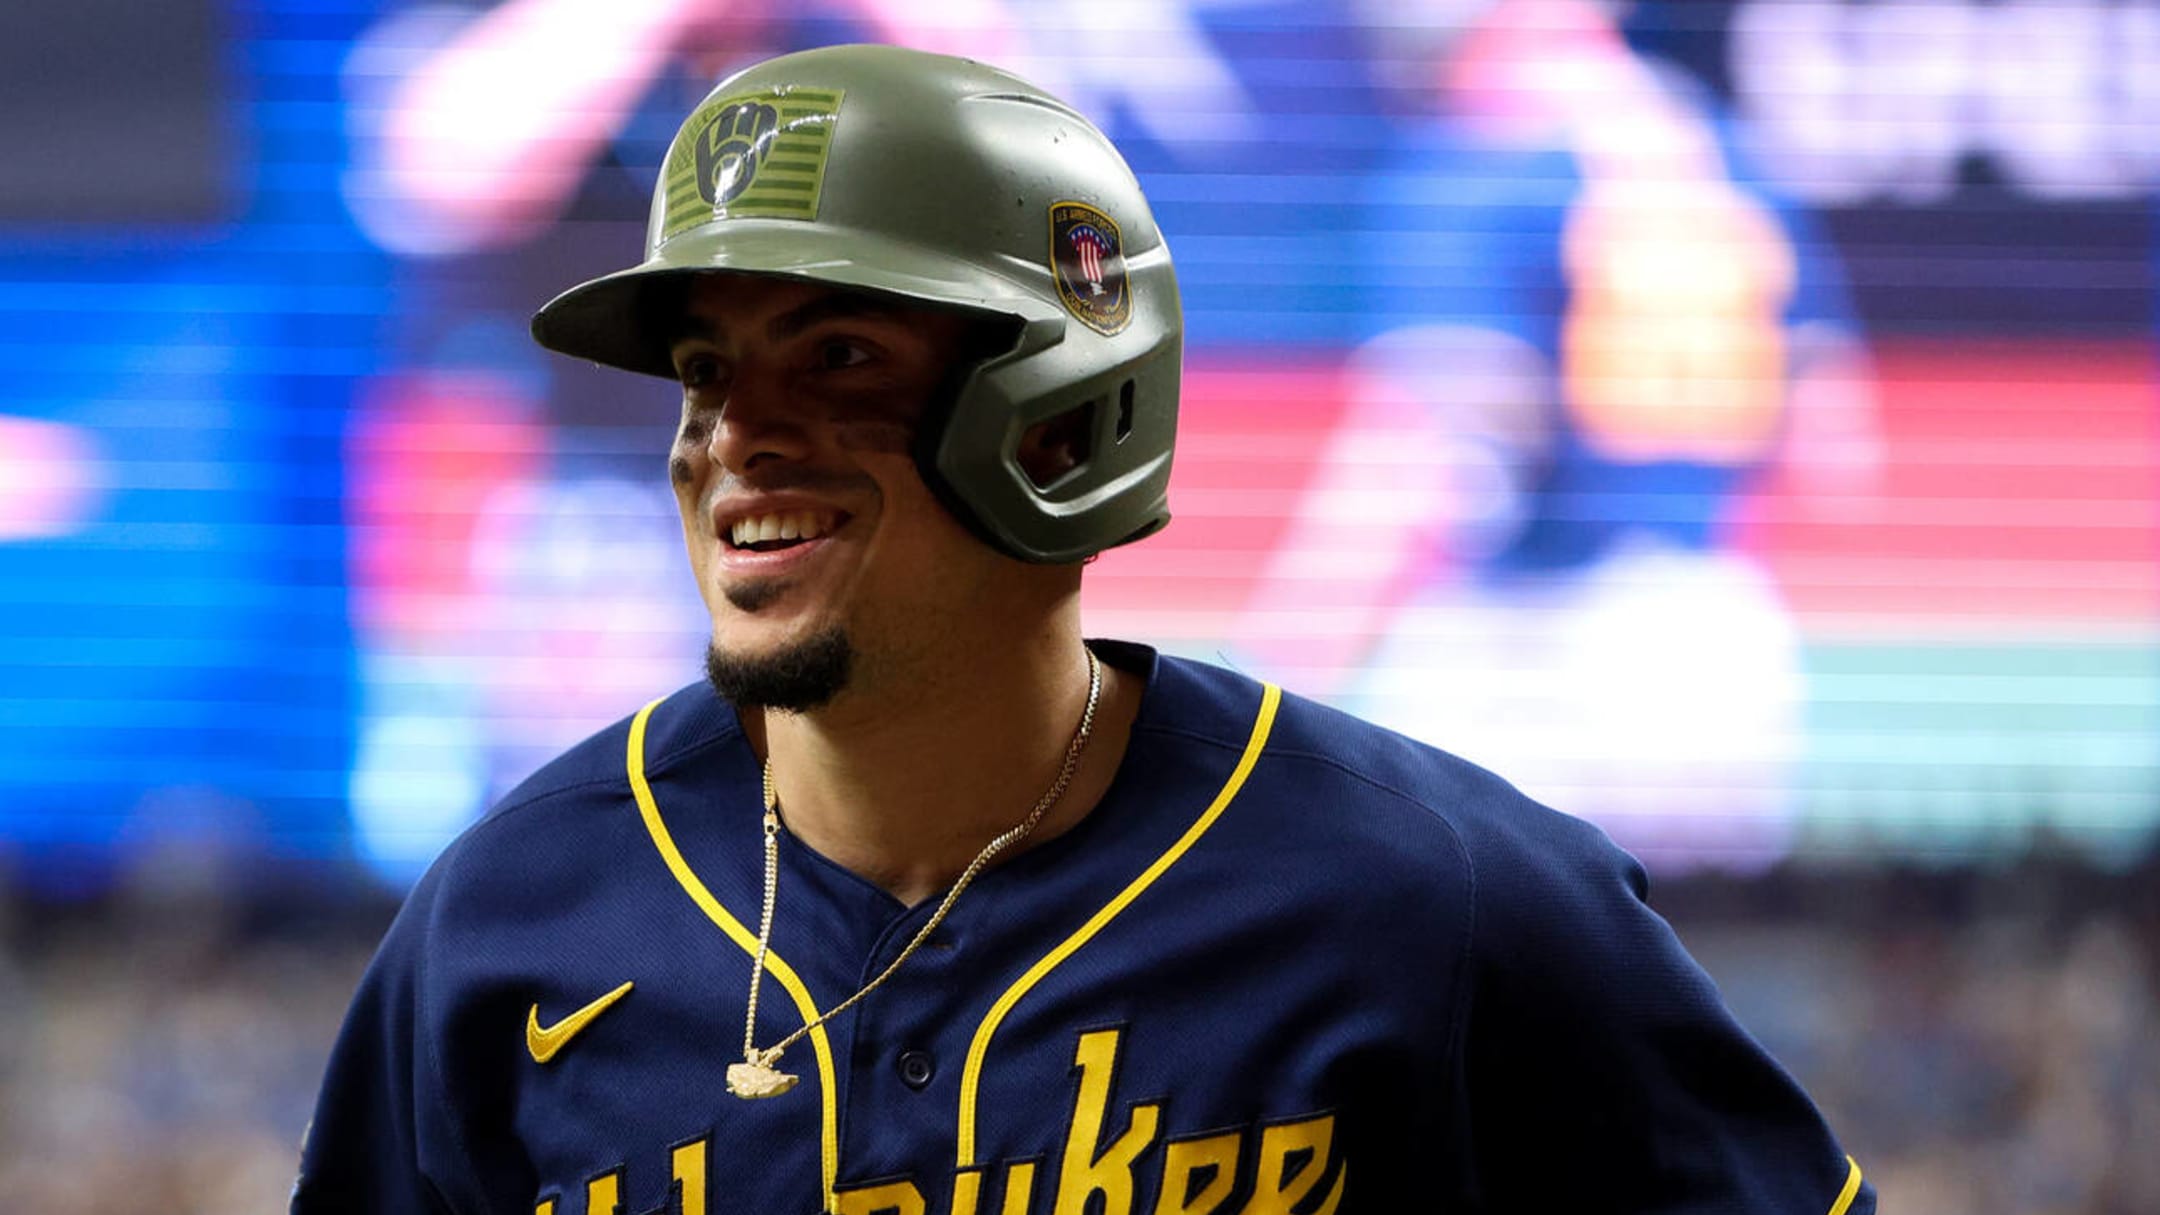 Brewers' Adames taken to hospital, heading to IL after getting hit